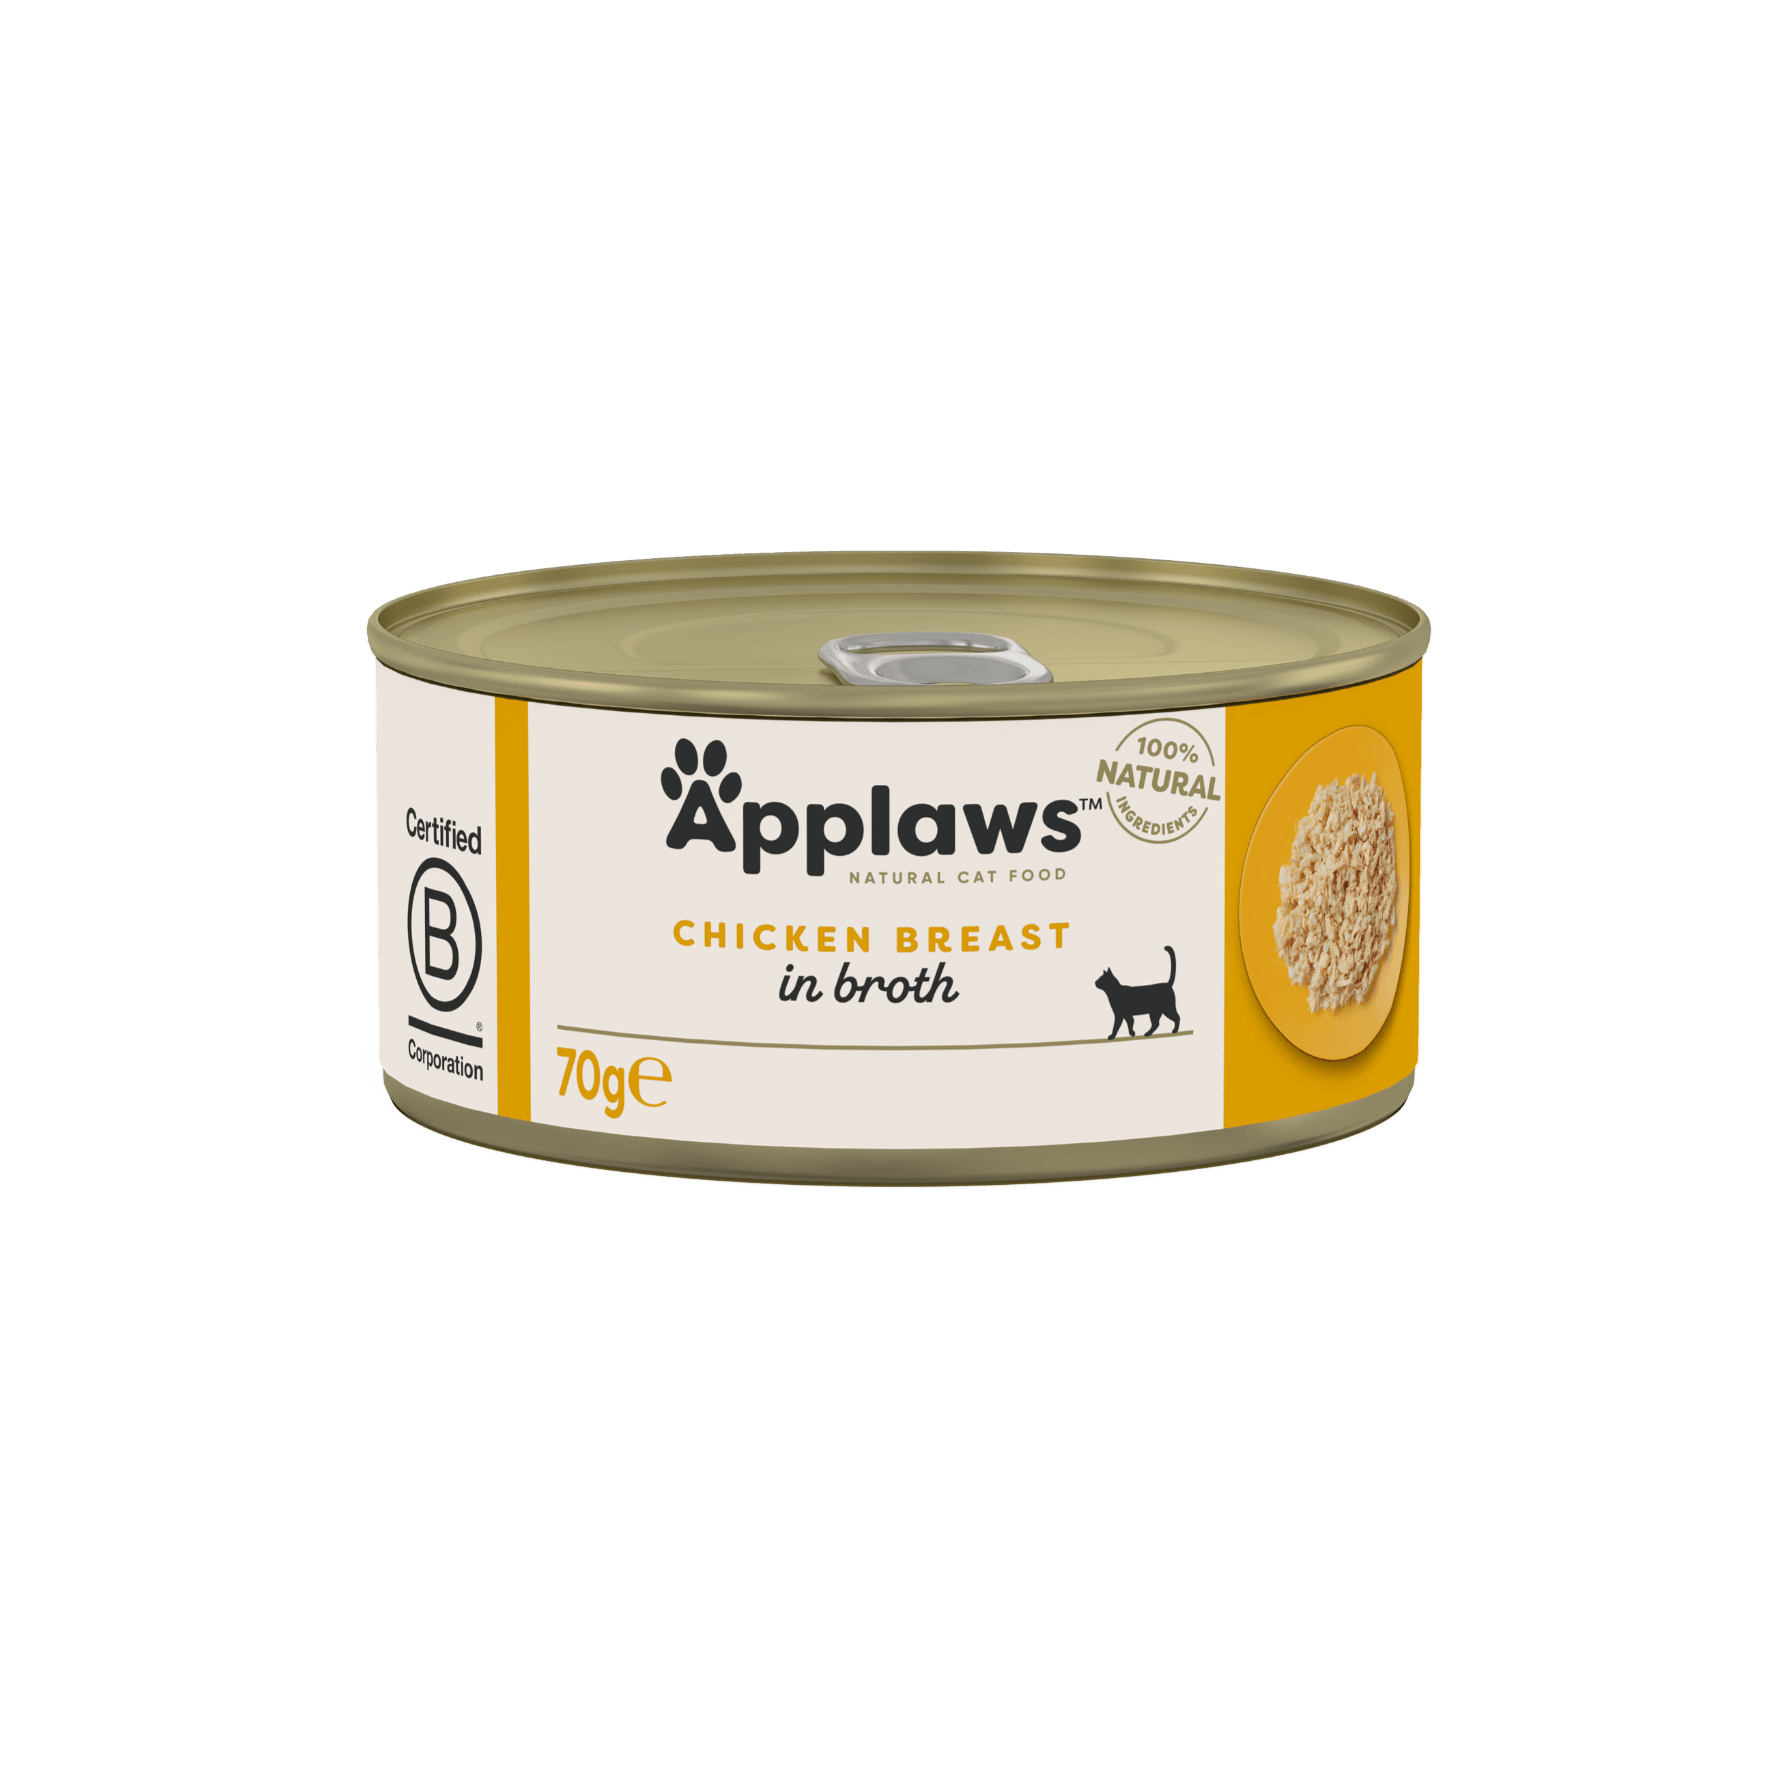 Applaws Cat Chicken Breast in Broth Tins, Applaws, 24x156g